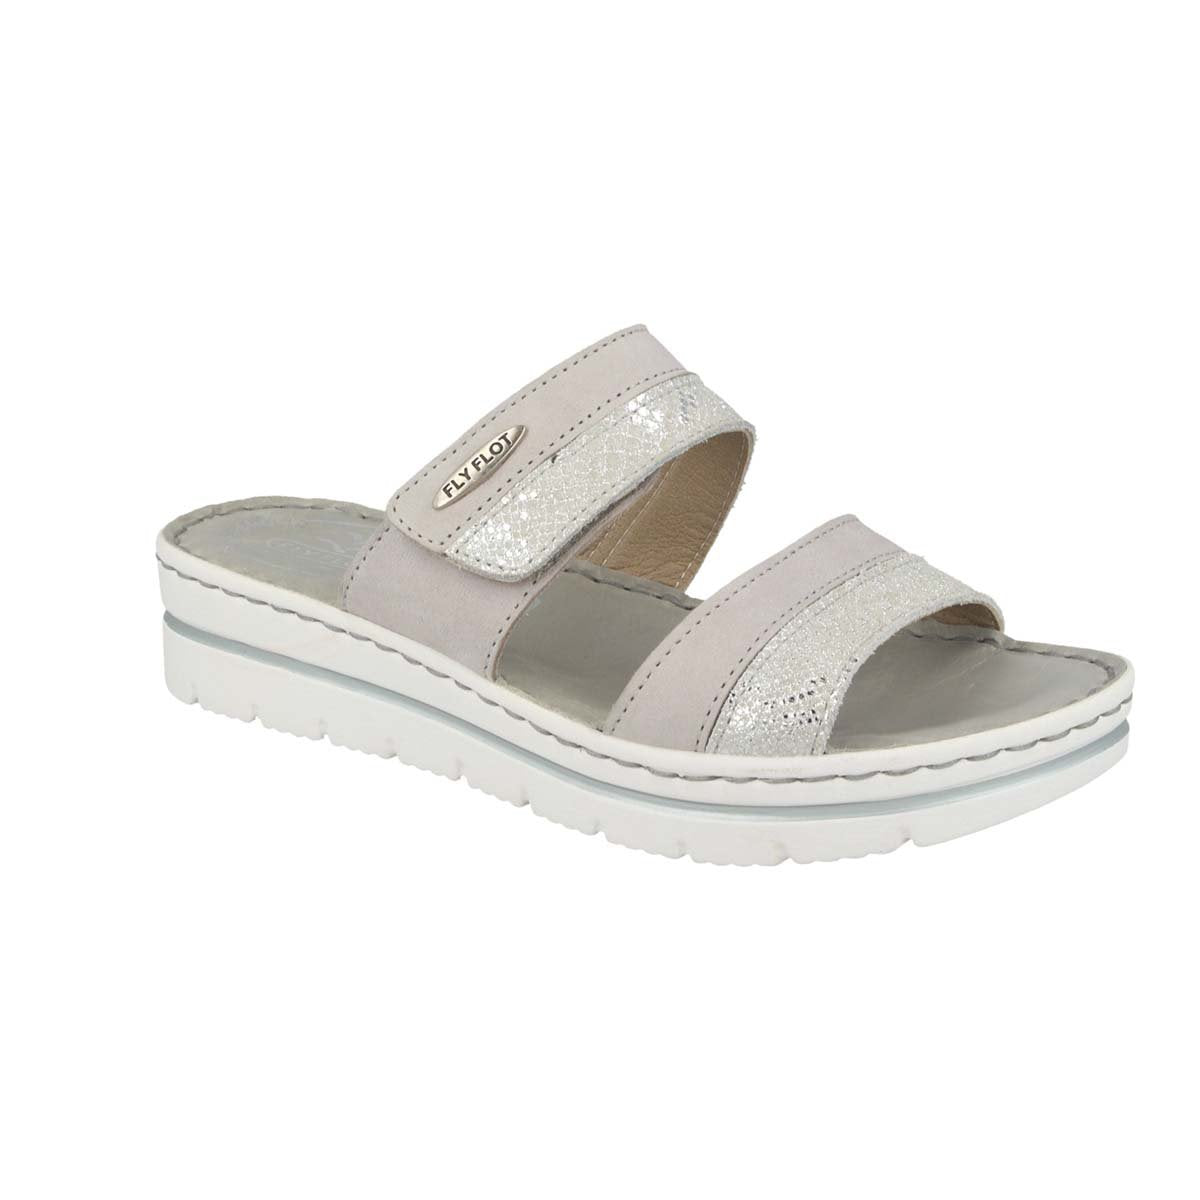 Photo of the Leather Woman Slipper Light Grey (25d30mg)